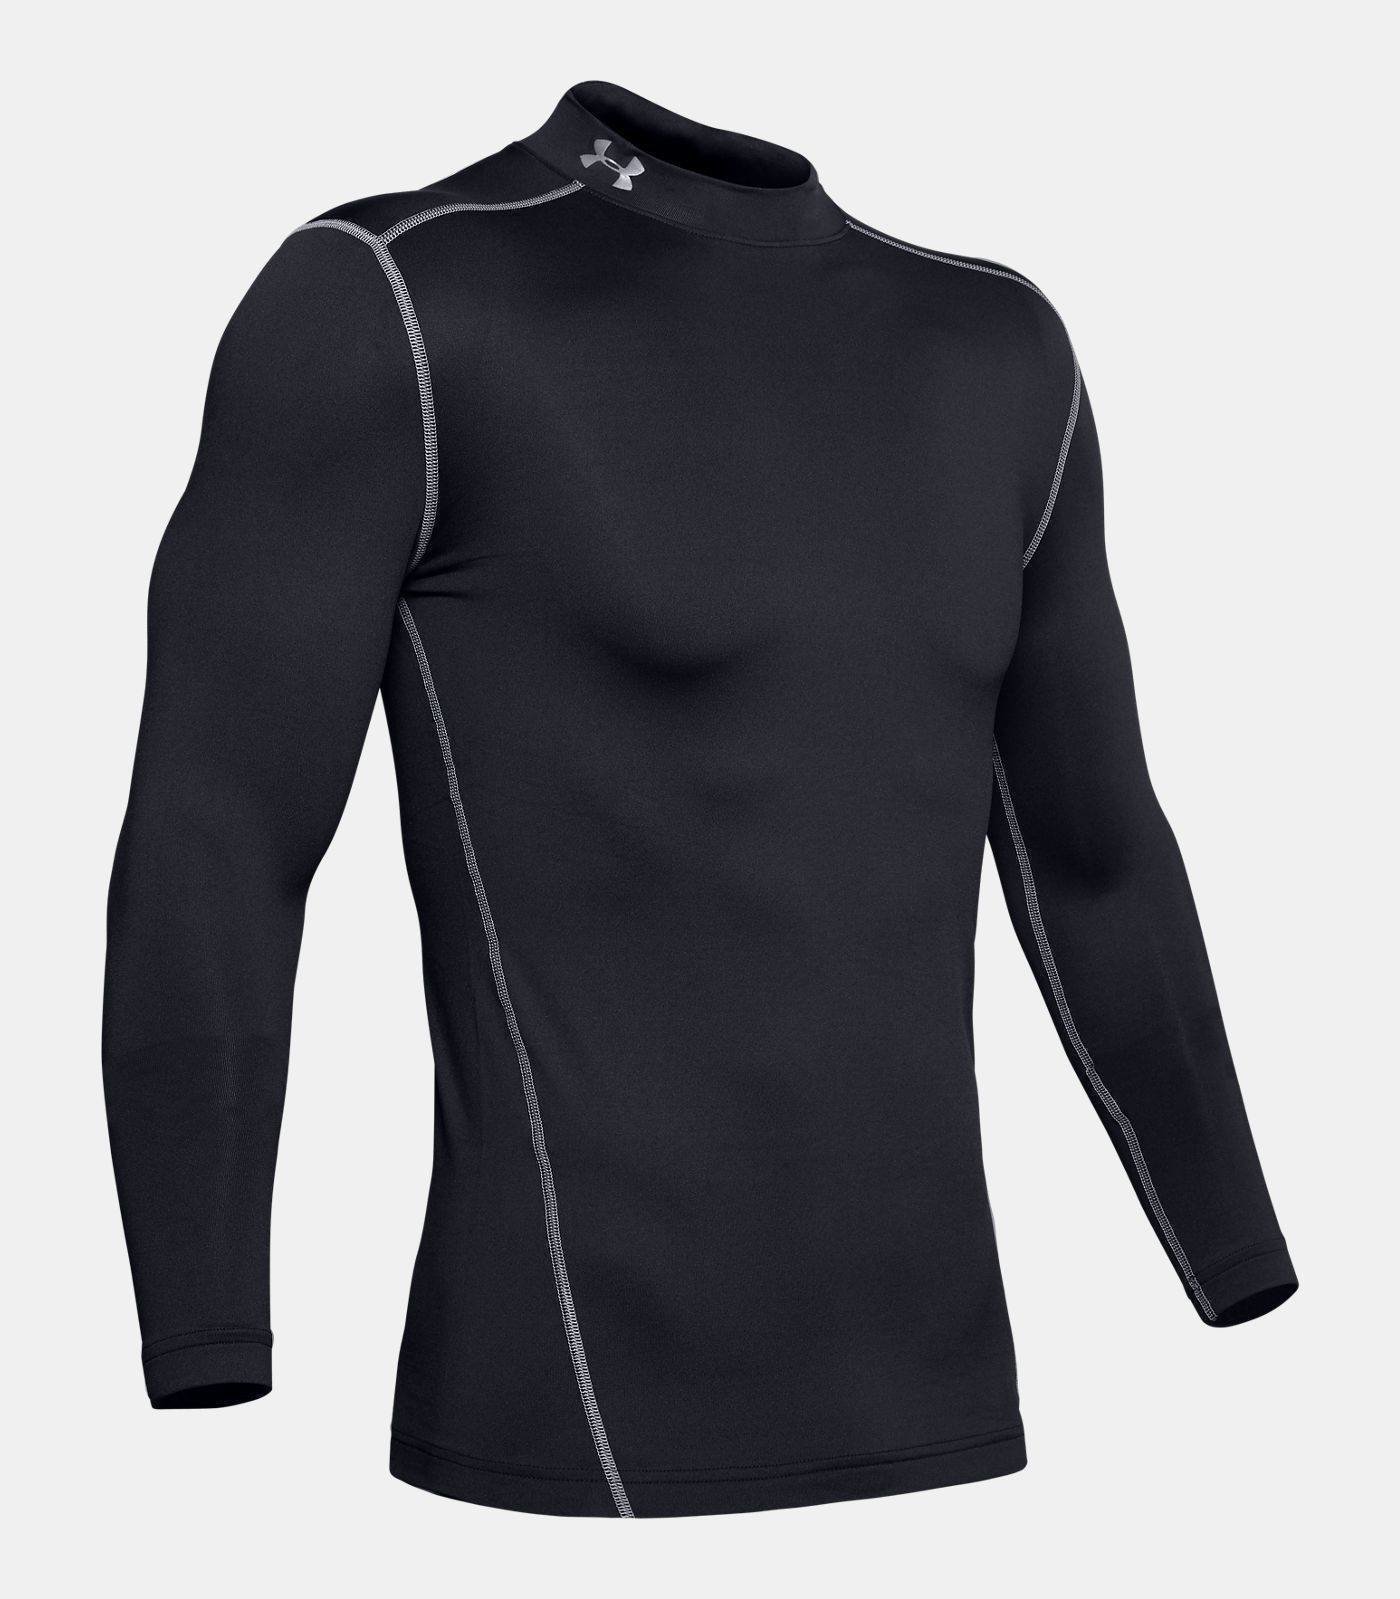 Thermal Clothing Under Armour ColdGear Compression Mock Black/Steel 2XL